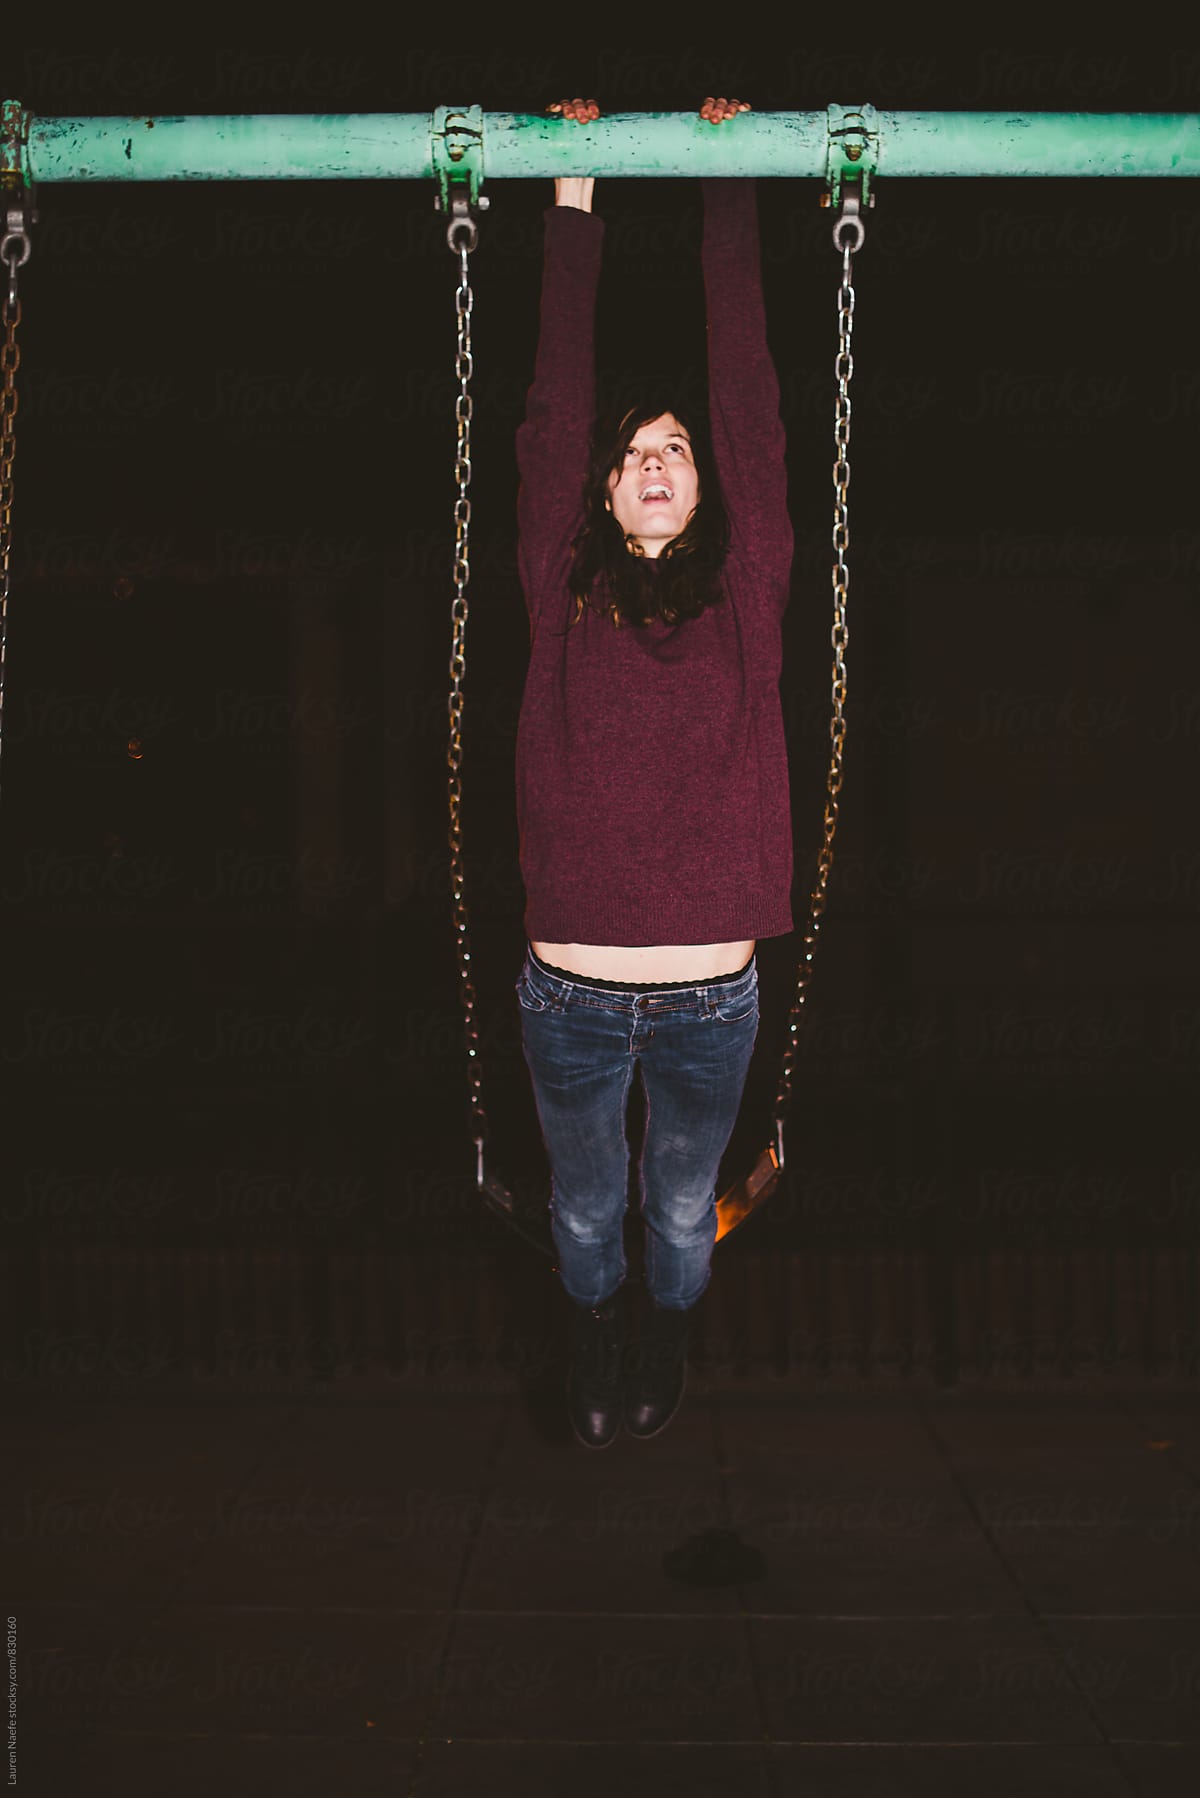 Playing on the swings